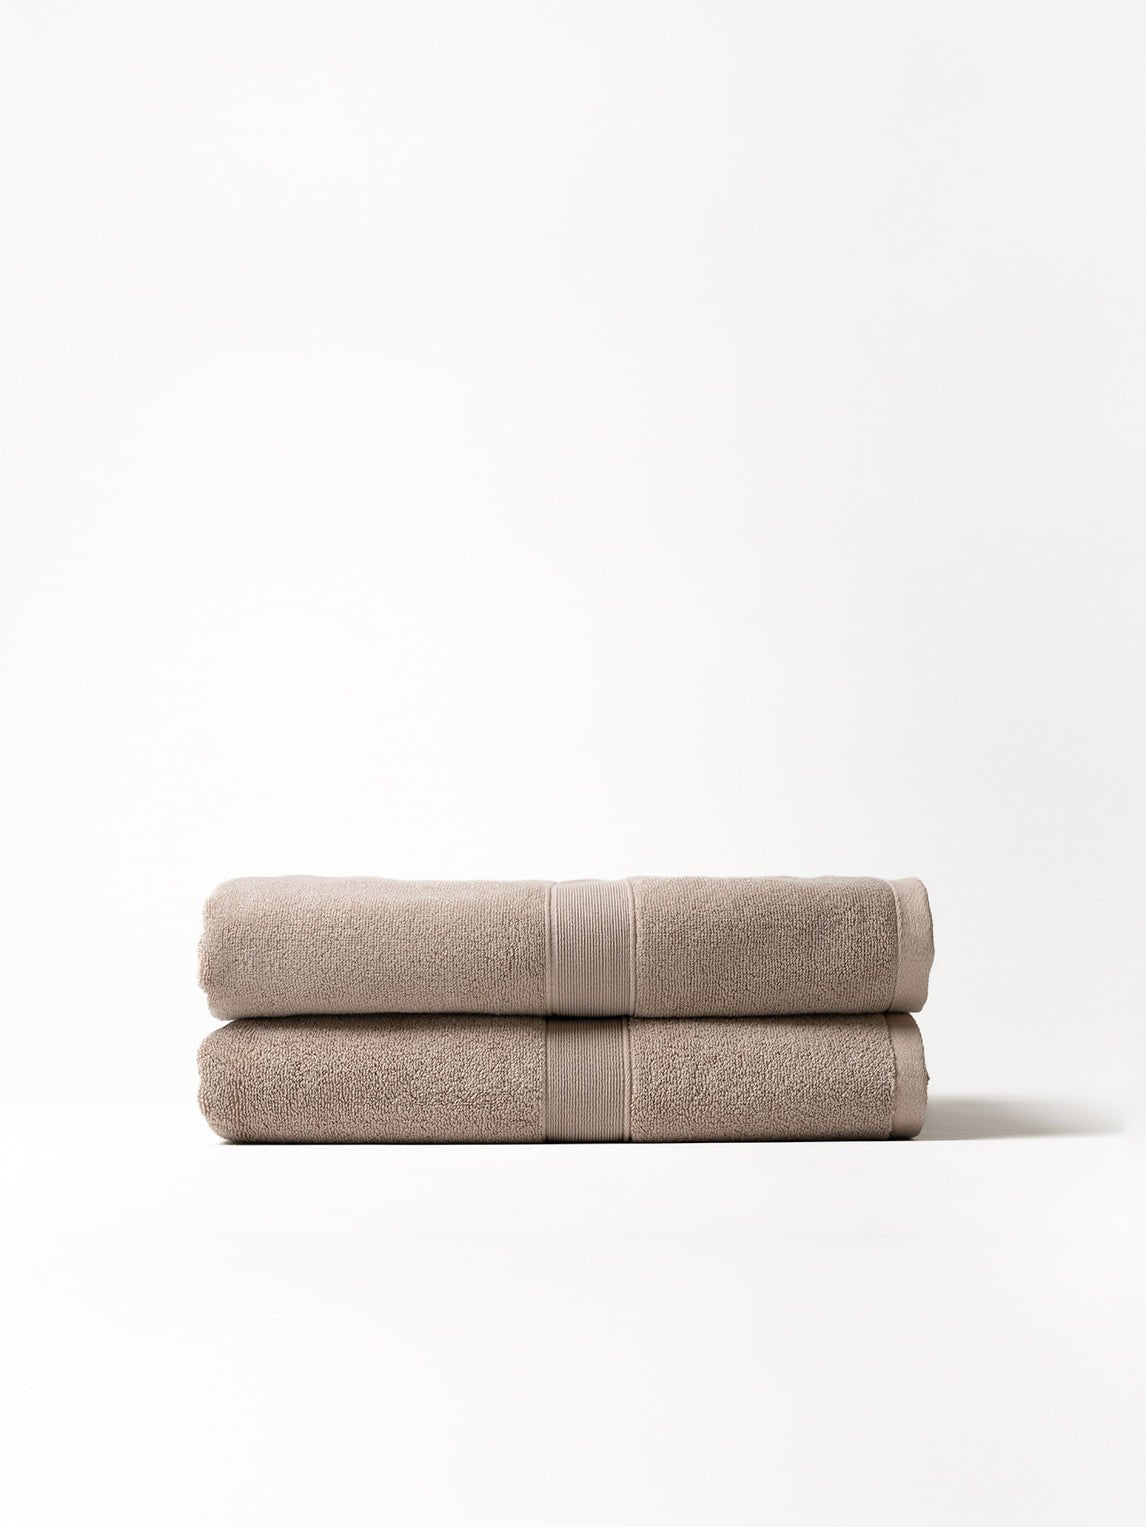 Two luxe bath sheets folded with white background |Color:Sand